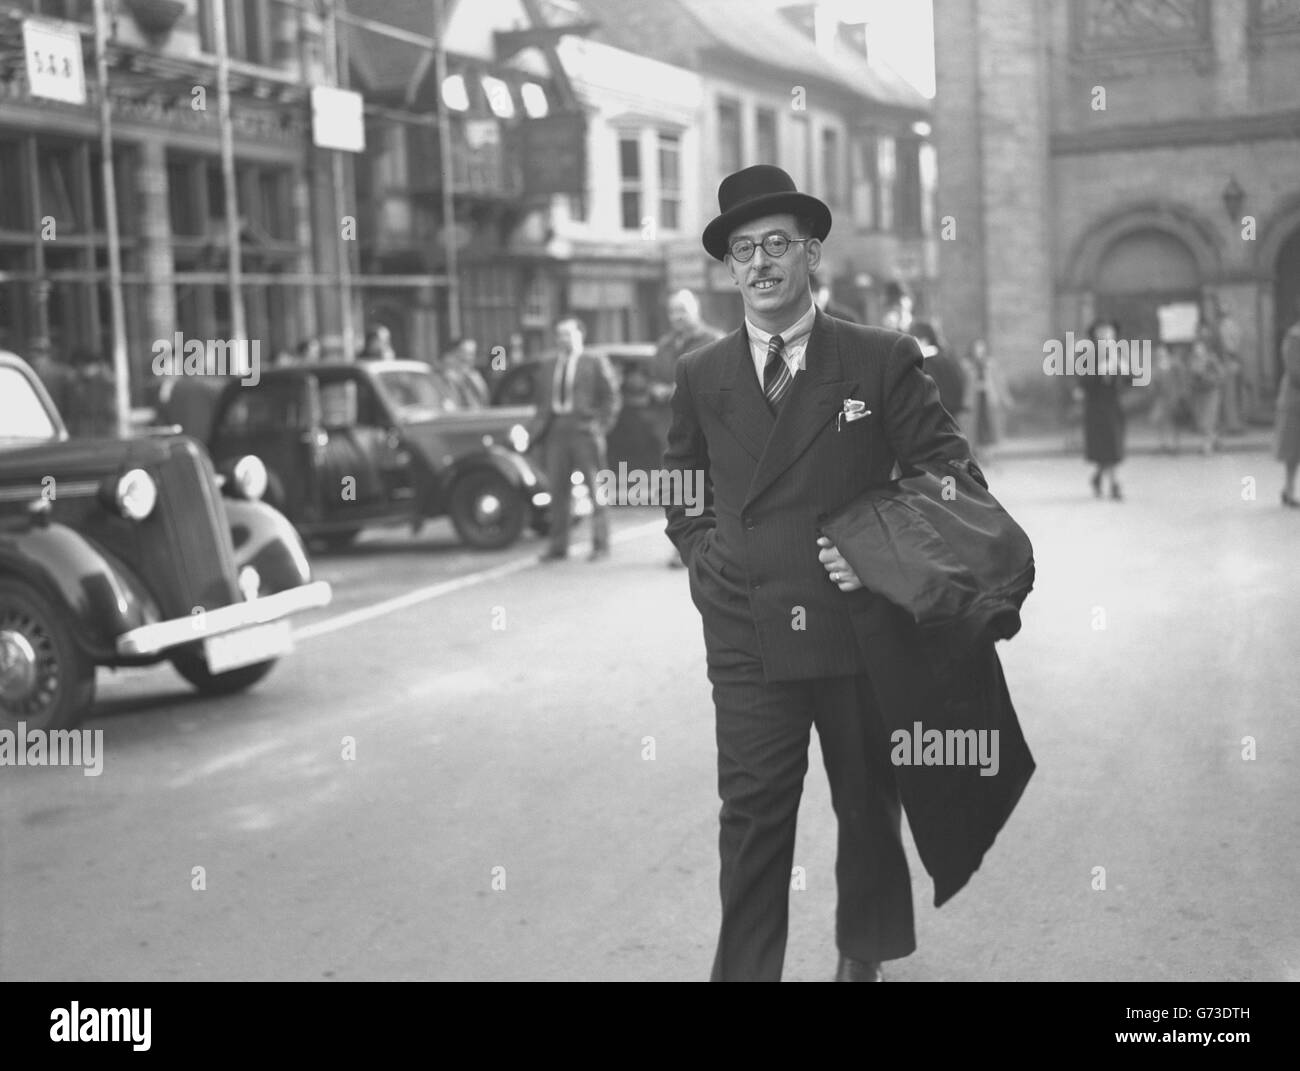 Edward Charles Roland Jones, a witness at Horsham Magistrates' Court, during the Crown's case against 39-year-old John George Haigh, the company director being tried for the murder of Mrs Olive Durand-Deacon, one of the victims of the so-called 'Acid Bath Murders'. Stock Photo